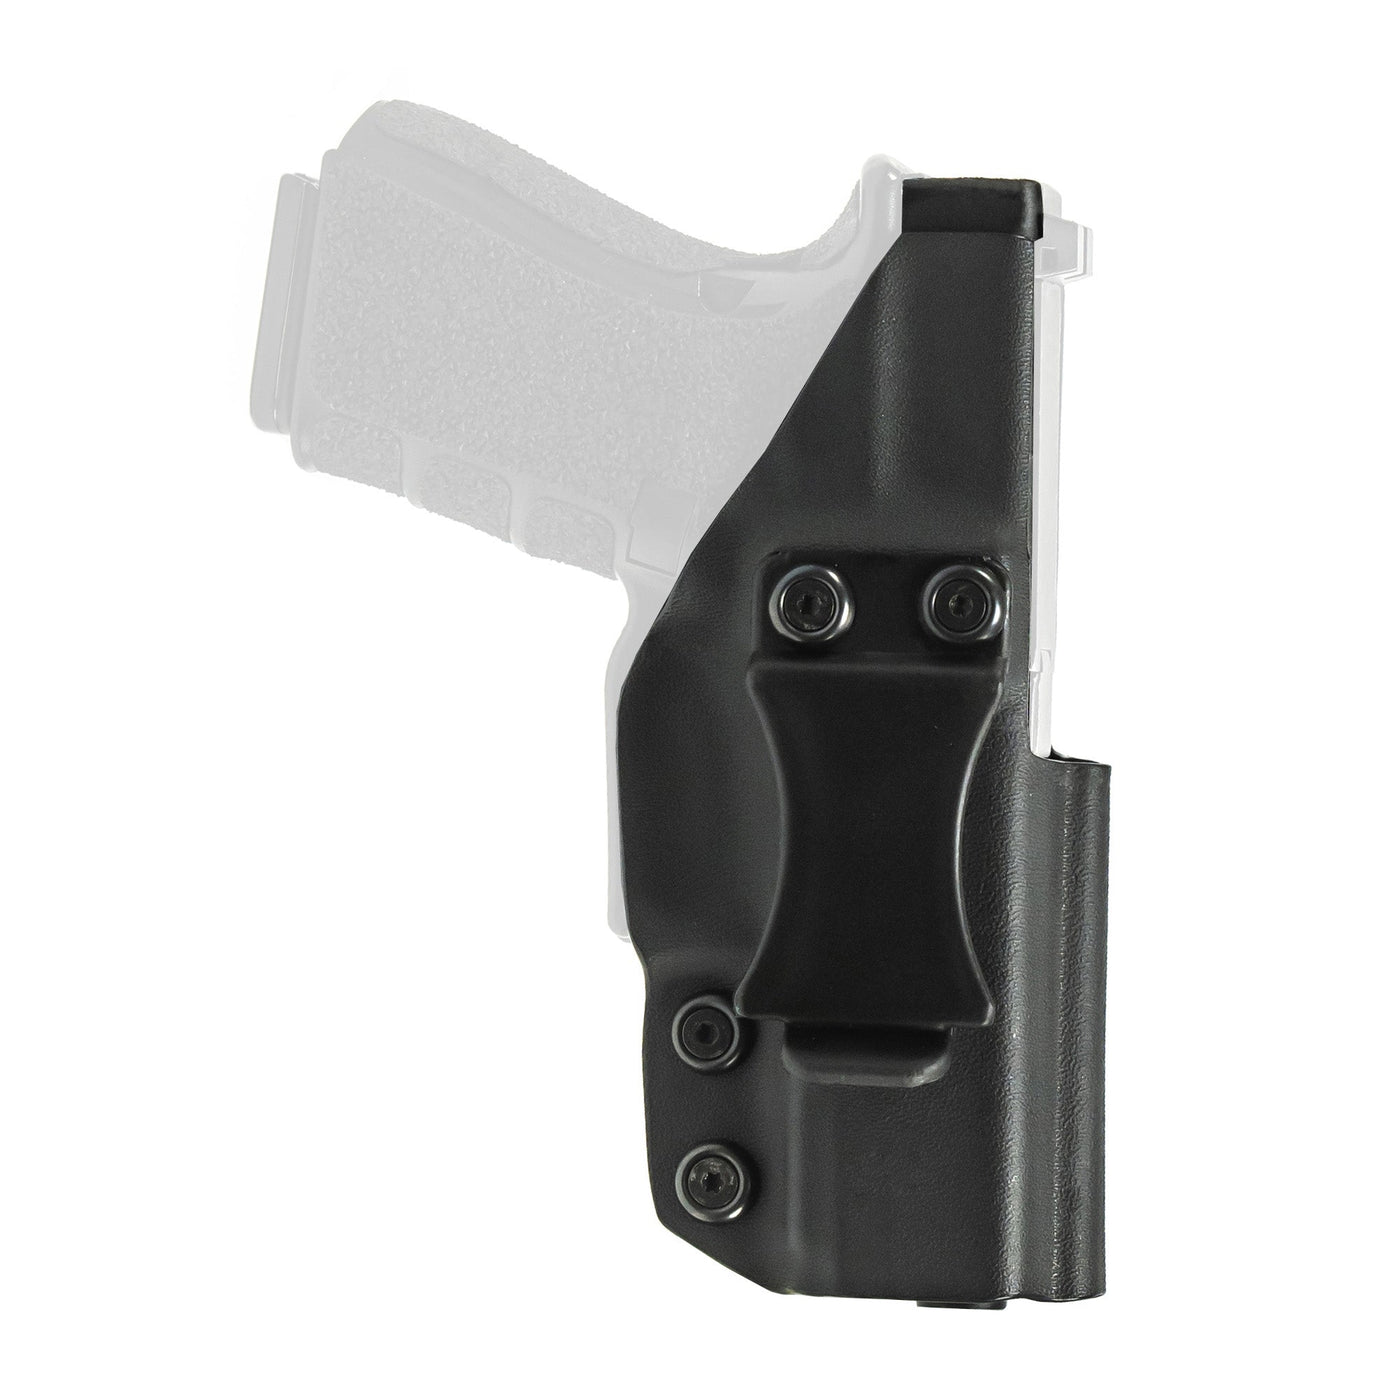 Tagua Tagua Dsrptor Or Spfd Hlct Ambi Blk Holsters